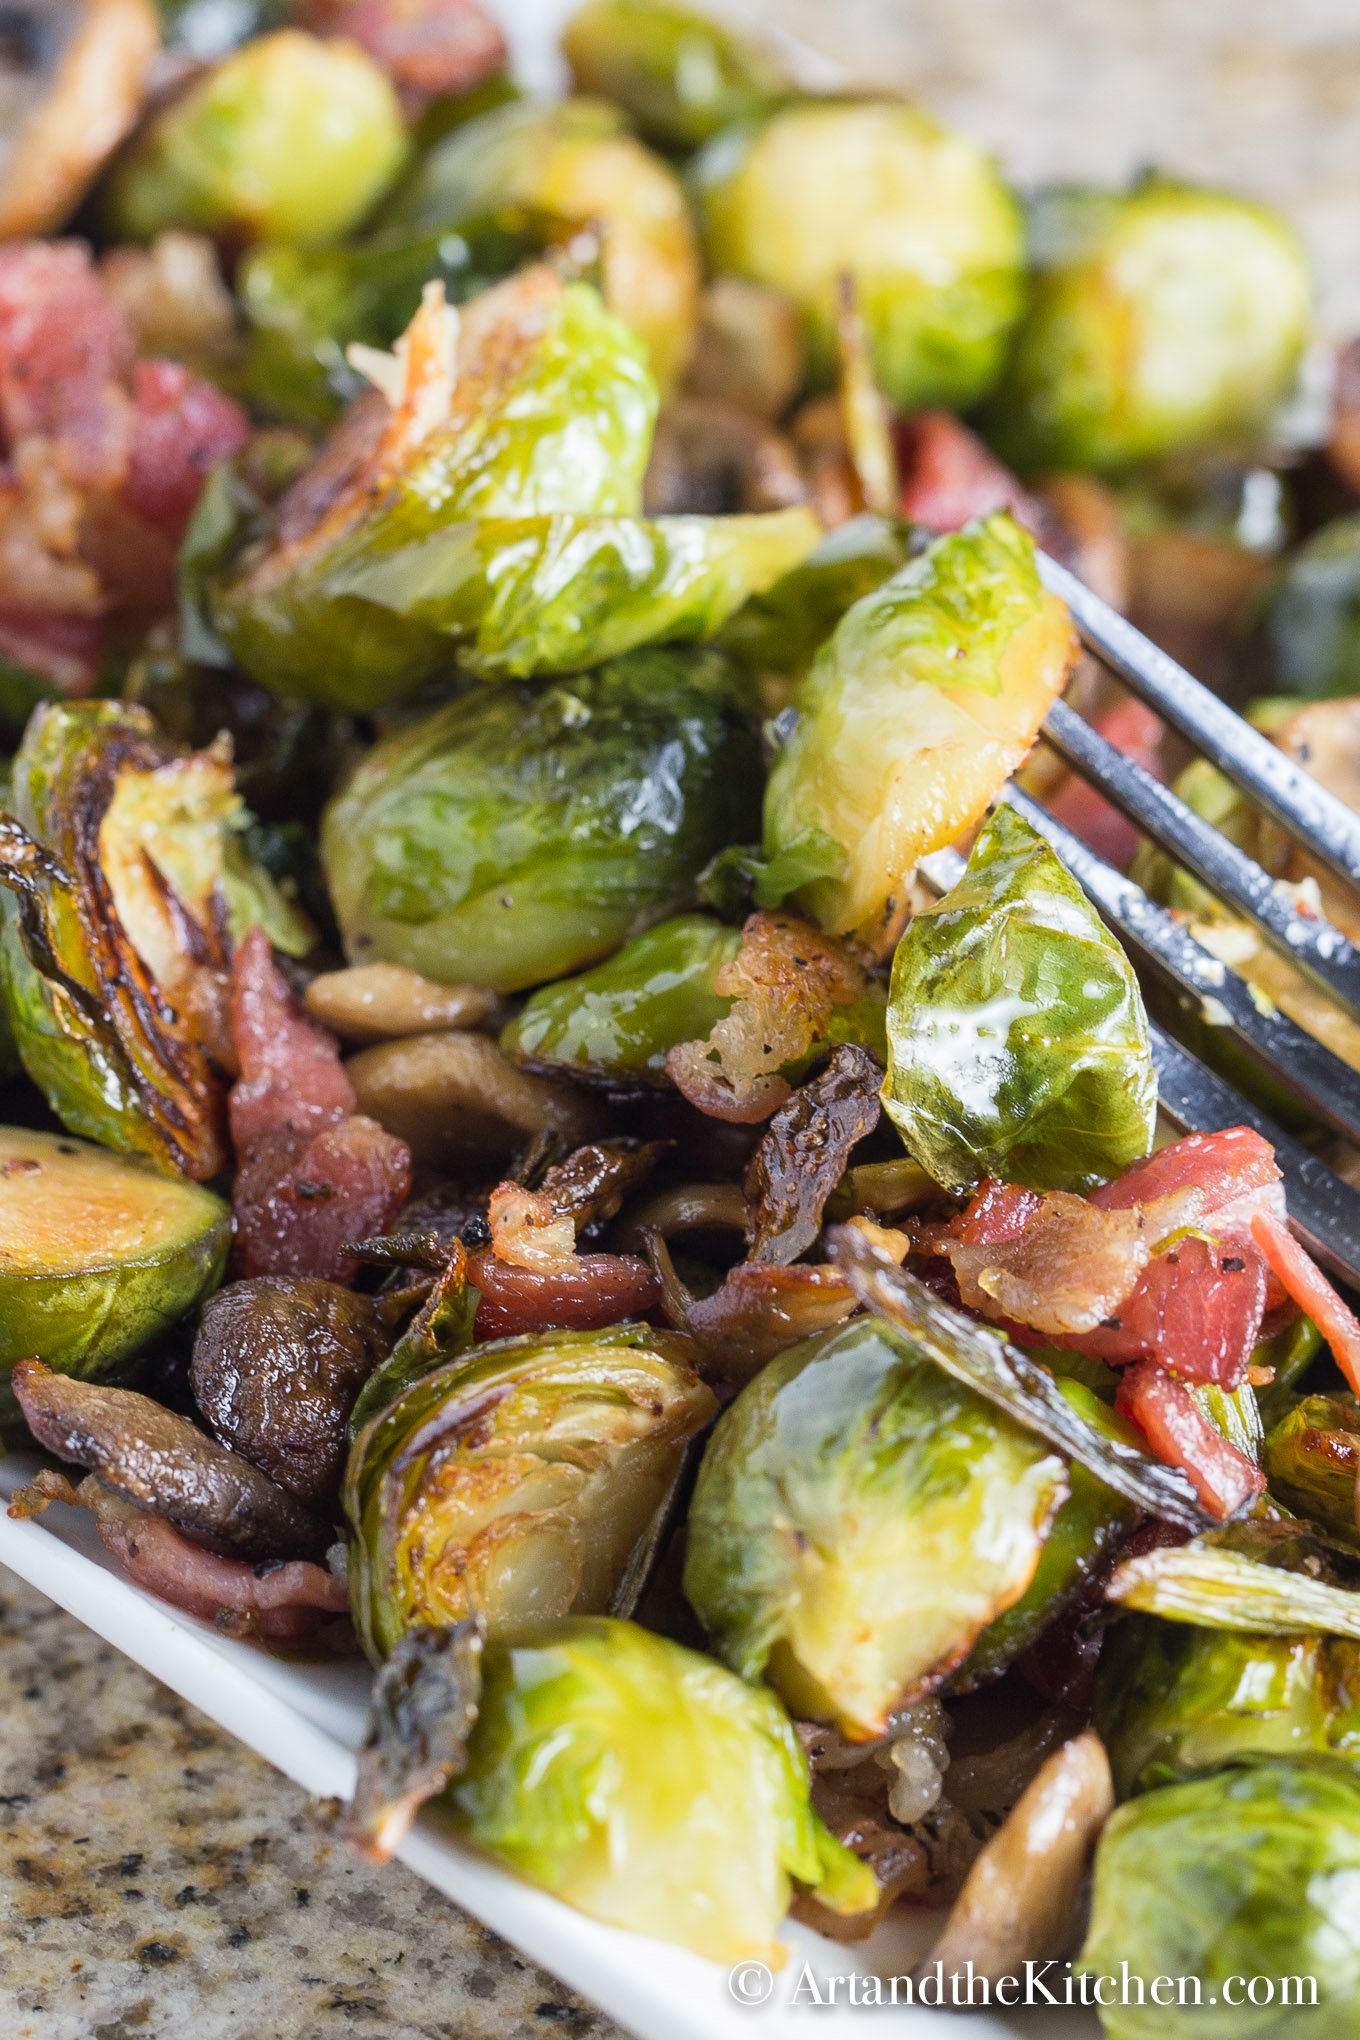 Roasted brussels sprouts with bacon and mushrooms.